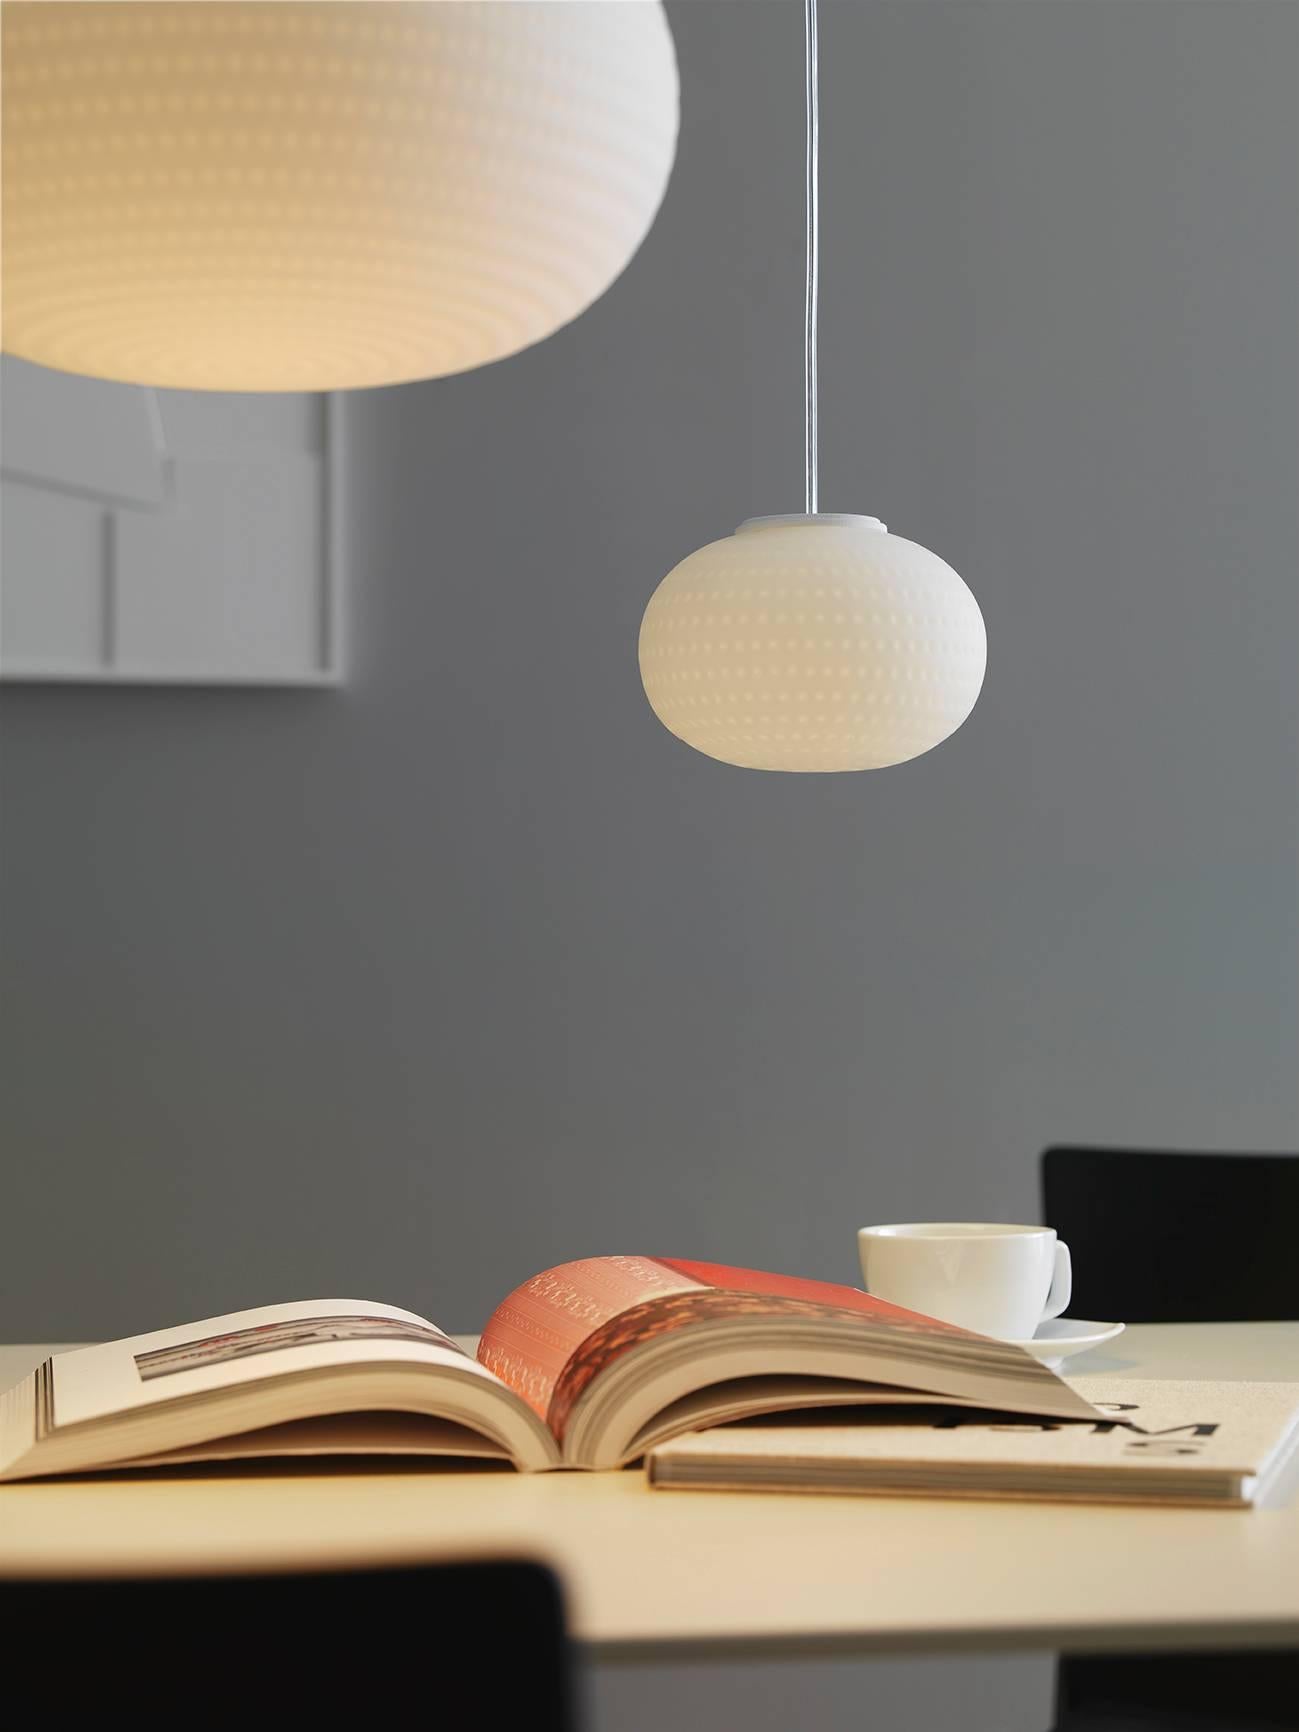 Designed by Matti Klenell in 2015 and manufactured by Fontana Arte, the Bianca suspension lamp is a family of lamps with diffuser in blown glass, comprising pendant, floor, wall/ceiling and table versions, the latter with or without base. Its